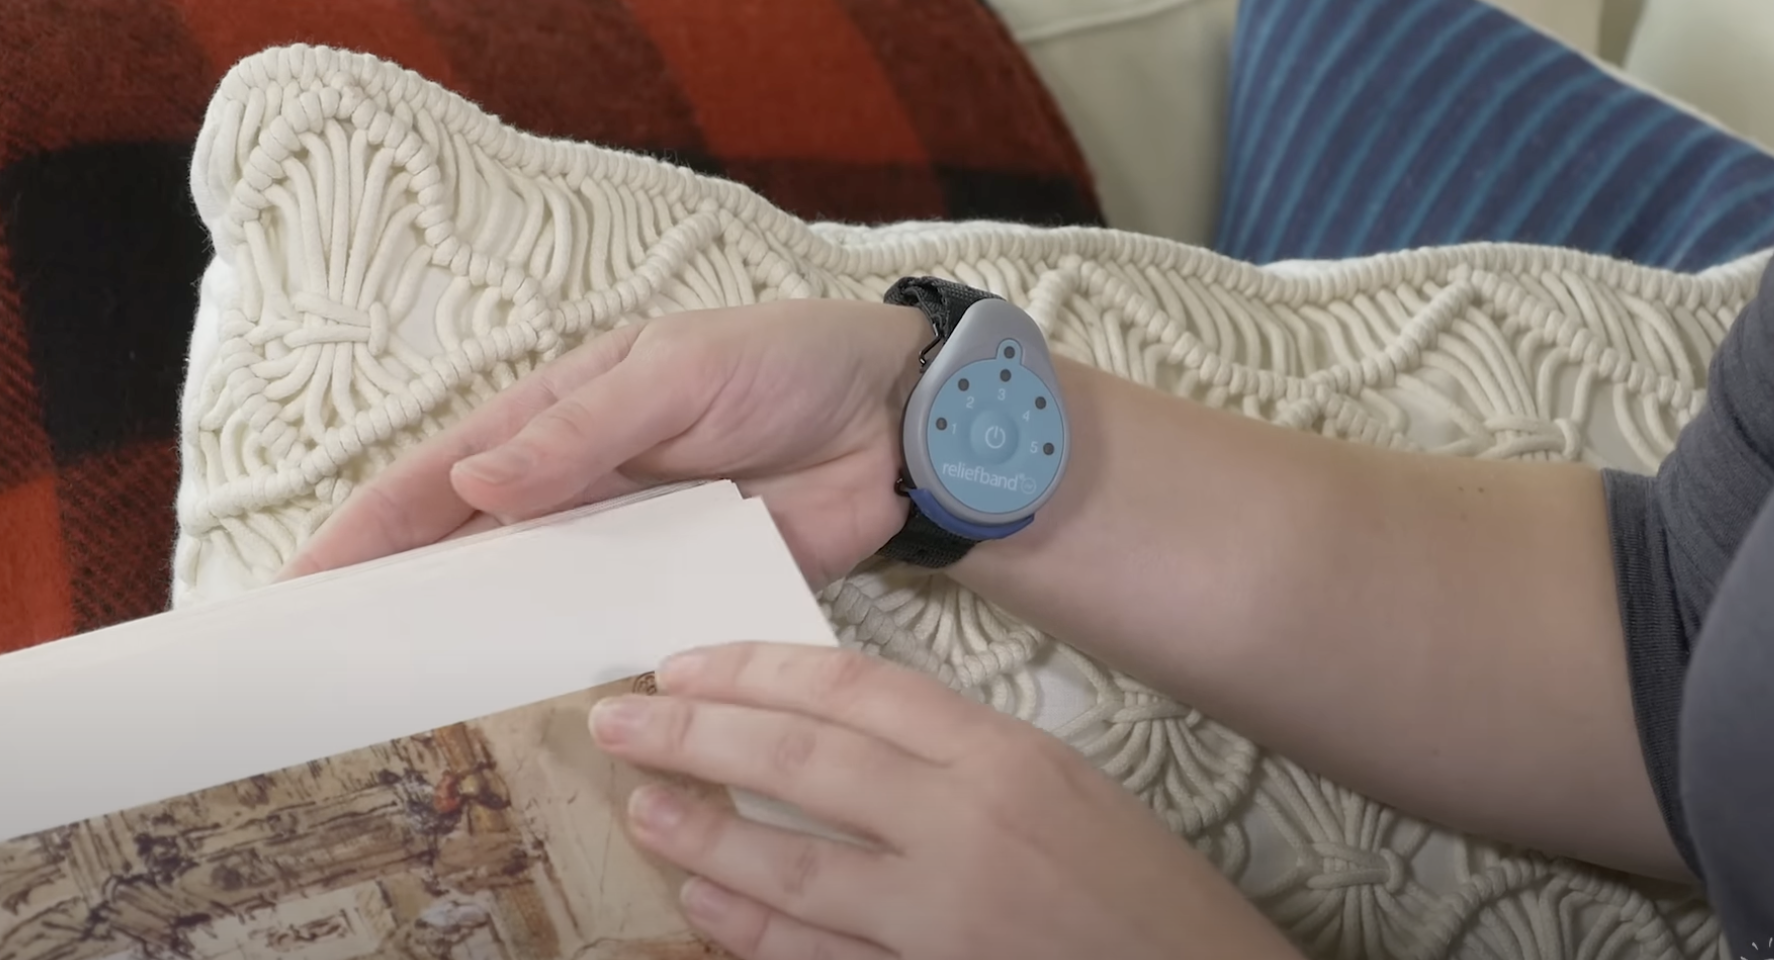 person using reliefbrand watch